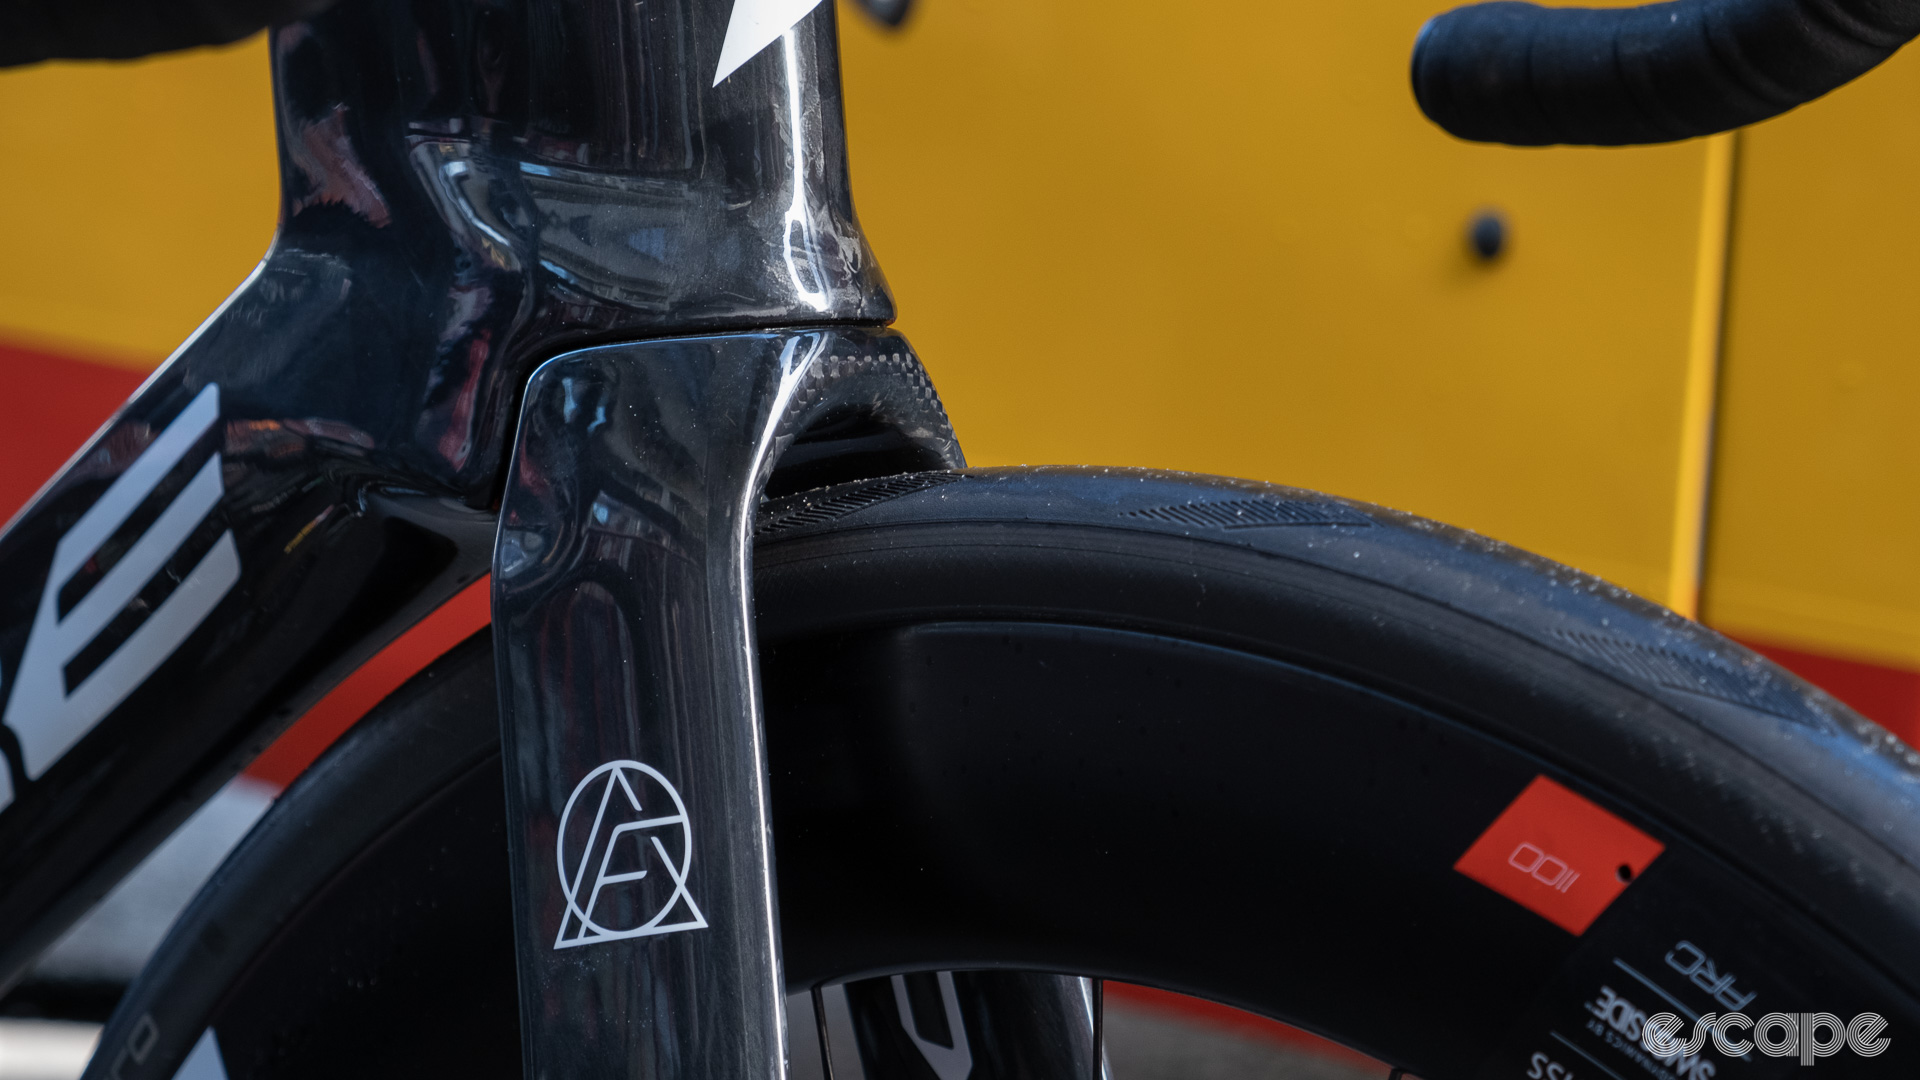 The image shows the fork crown on Dare's new aero bike.